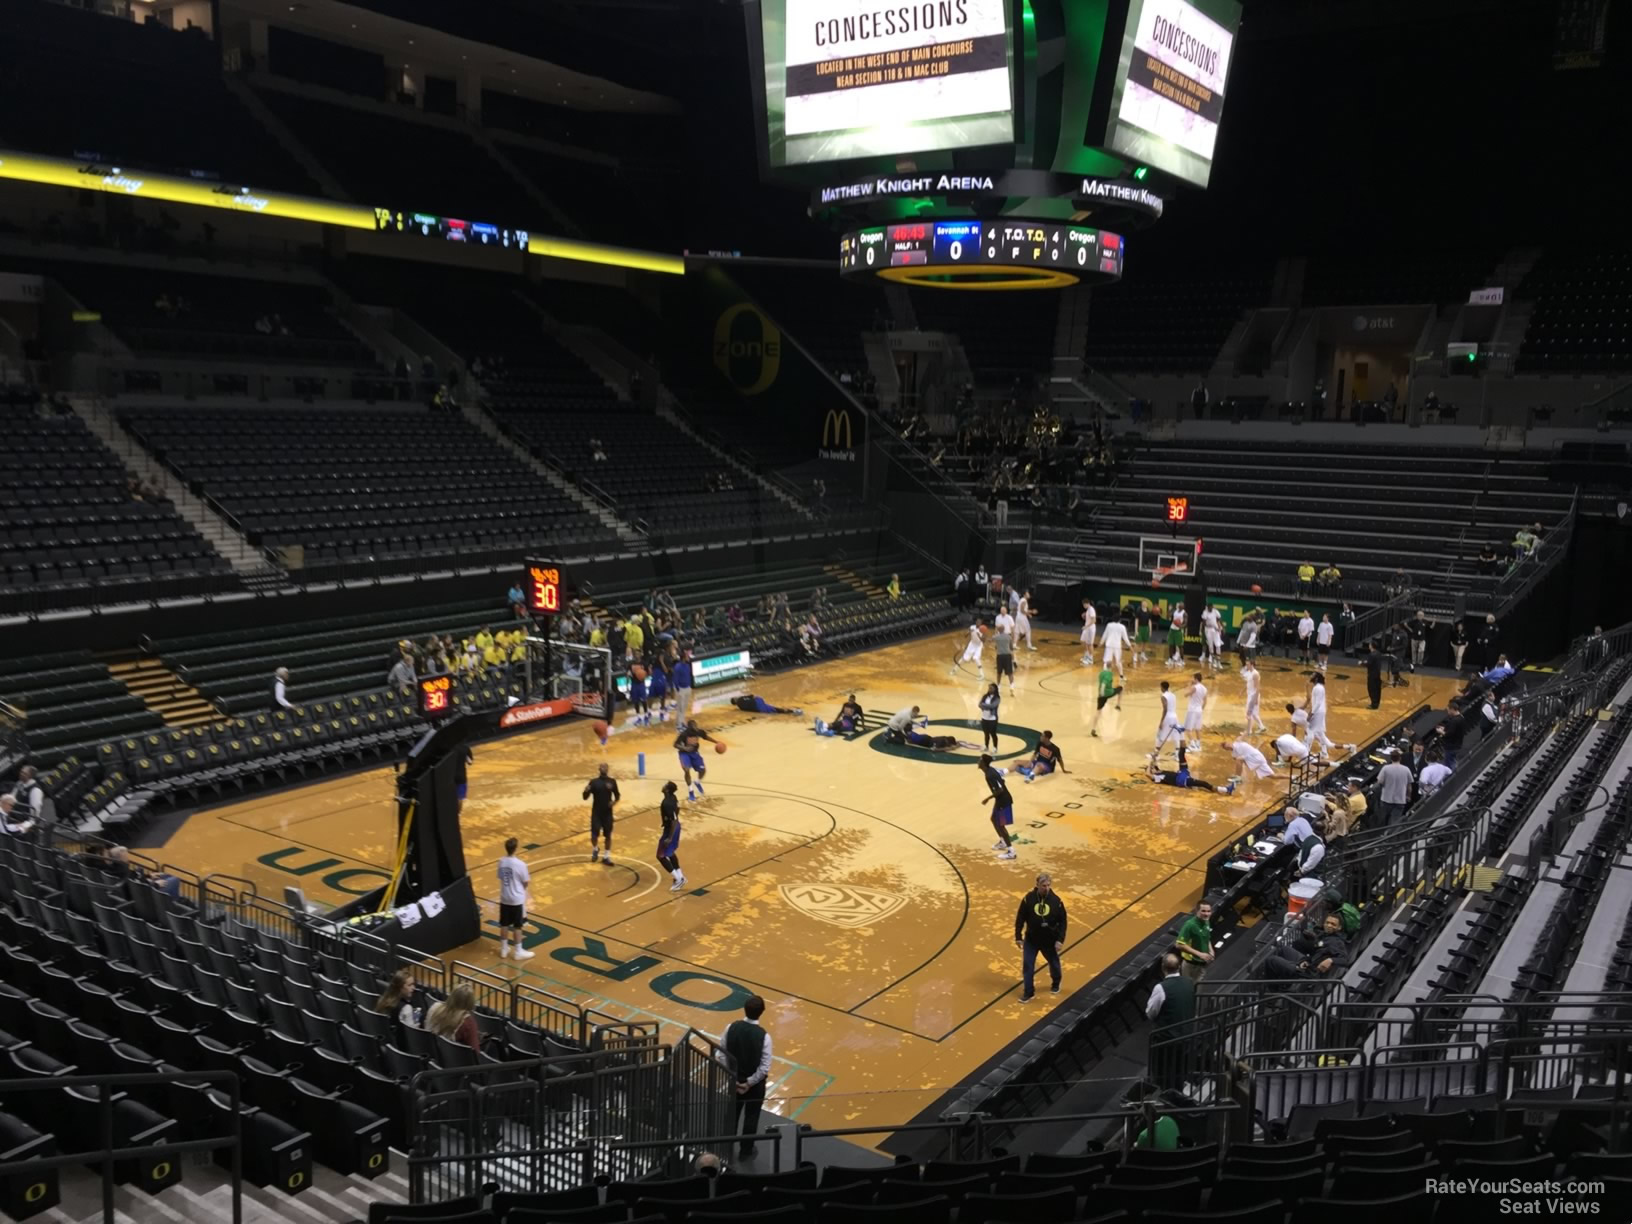 section 106, row k seat view  - matthew knight arena